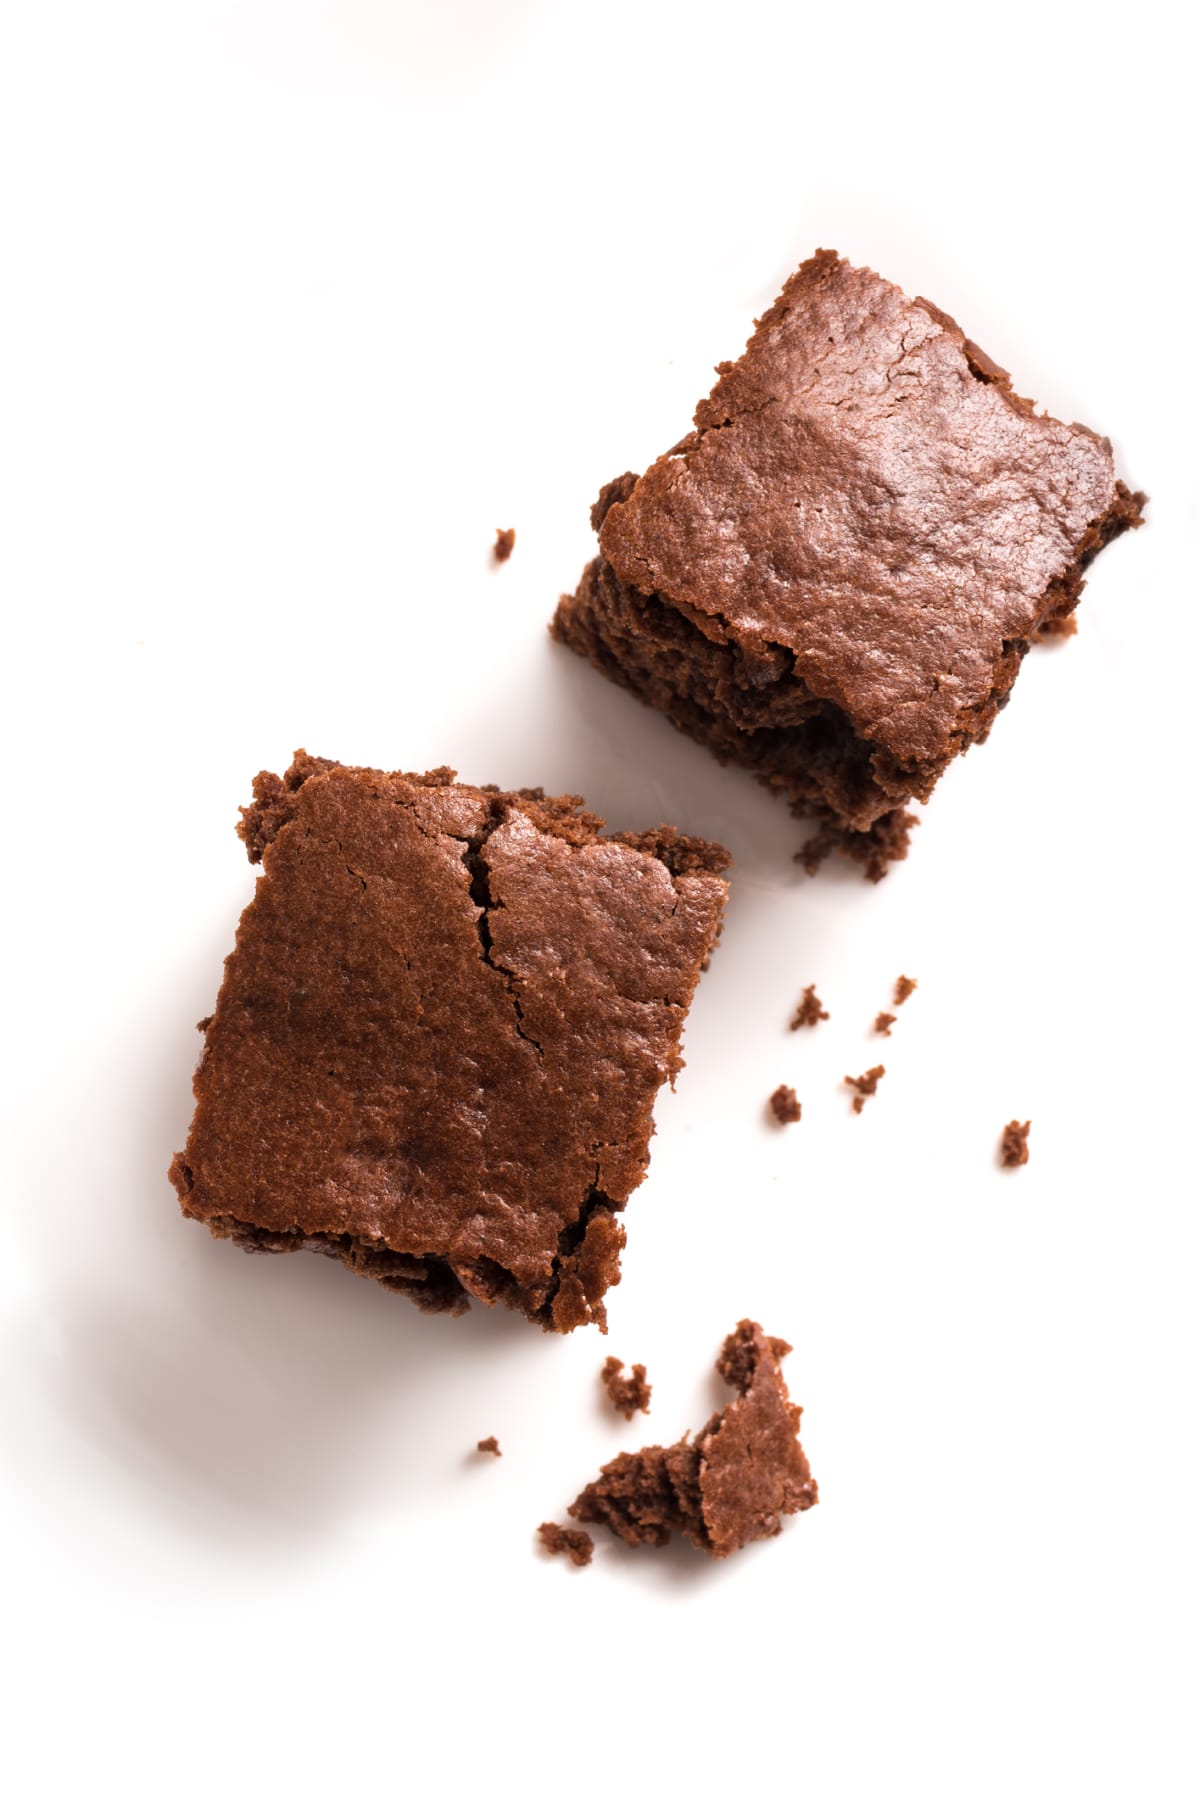 Chocolate brownies isolated on white background. Delicious homemade dark chocolate dessert, brownie.